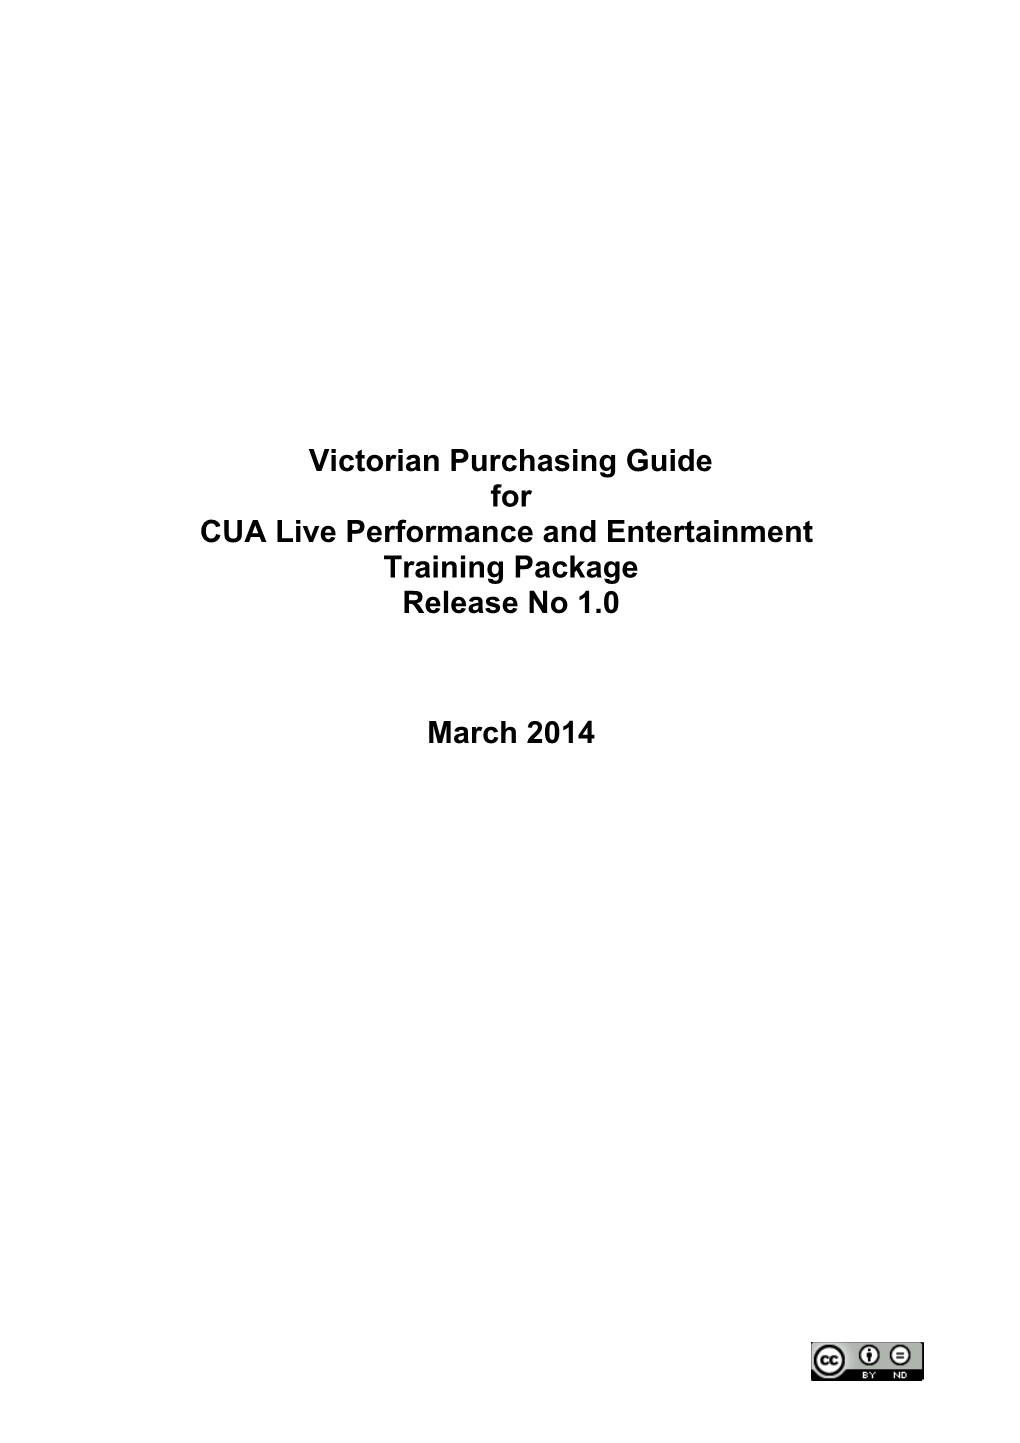 Victorian Purchasing Guide for CUA Live Performance and Entertainment Version 1